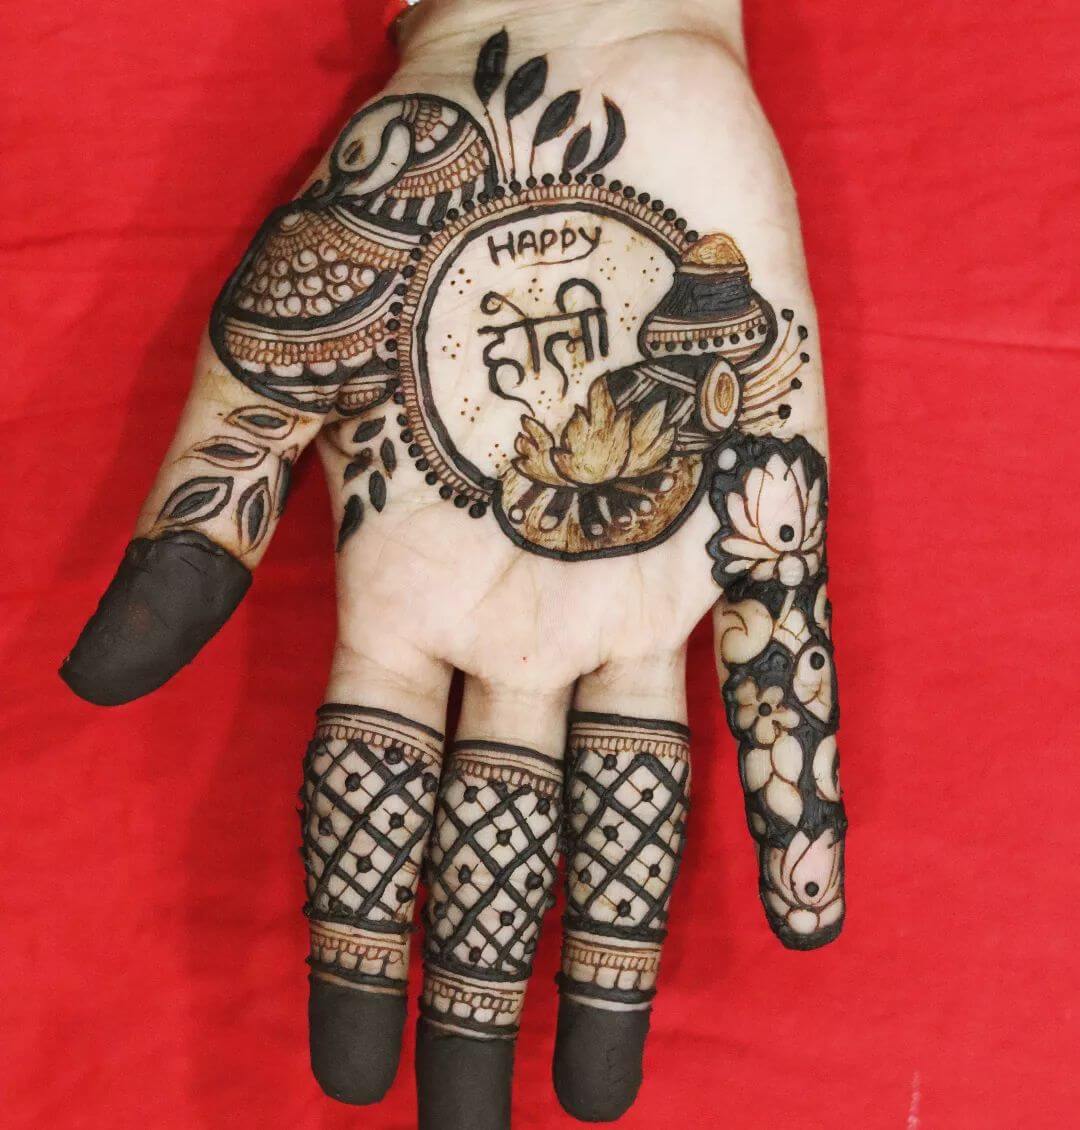 Unique Mehndi Design With Peacock and Lotus Motifs For Holi